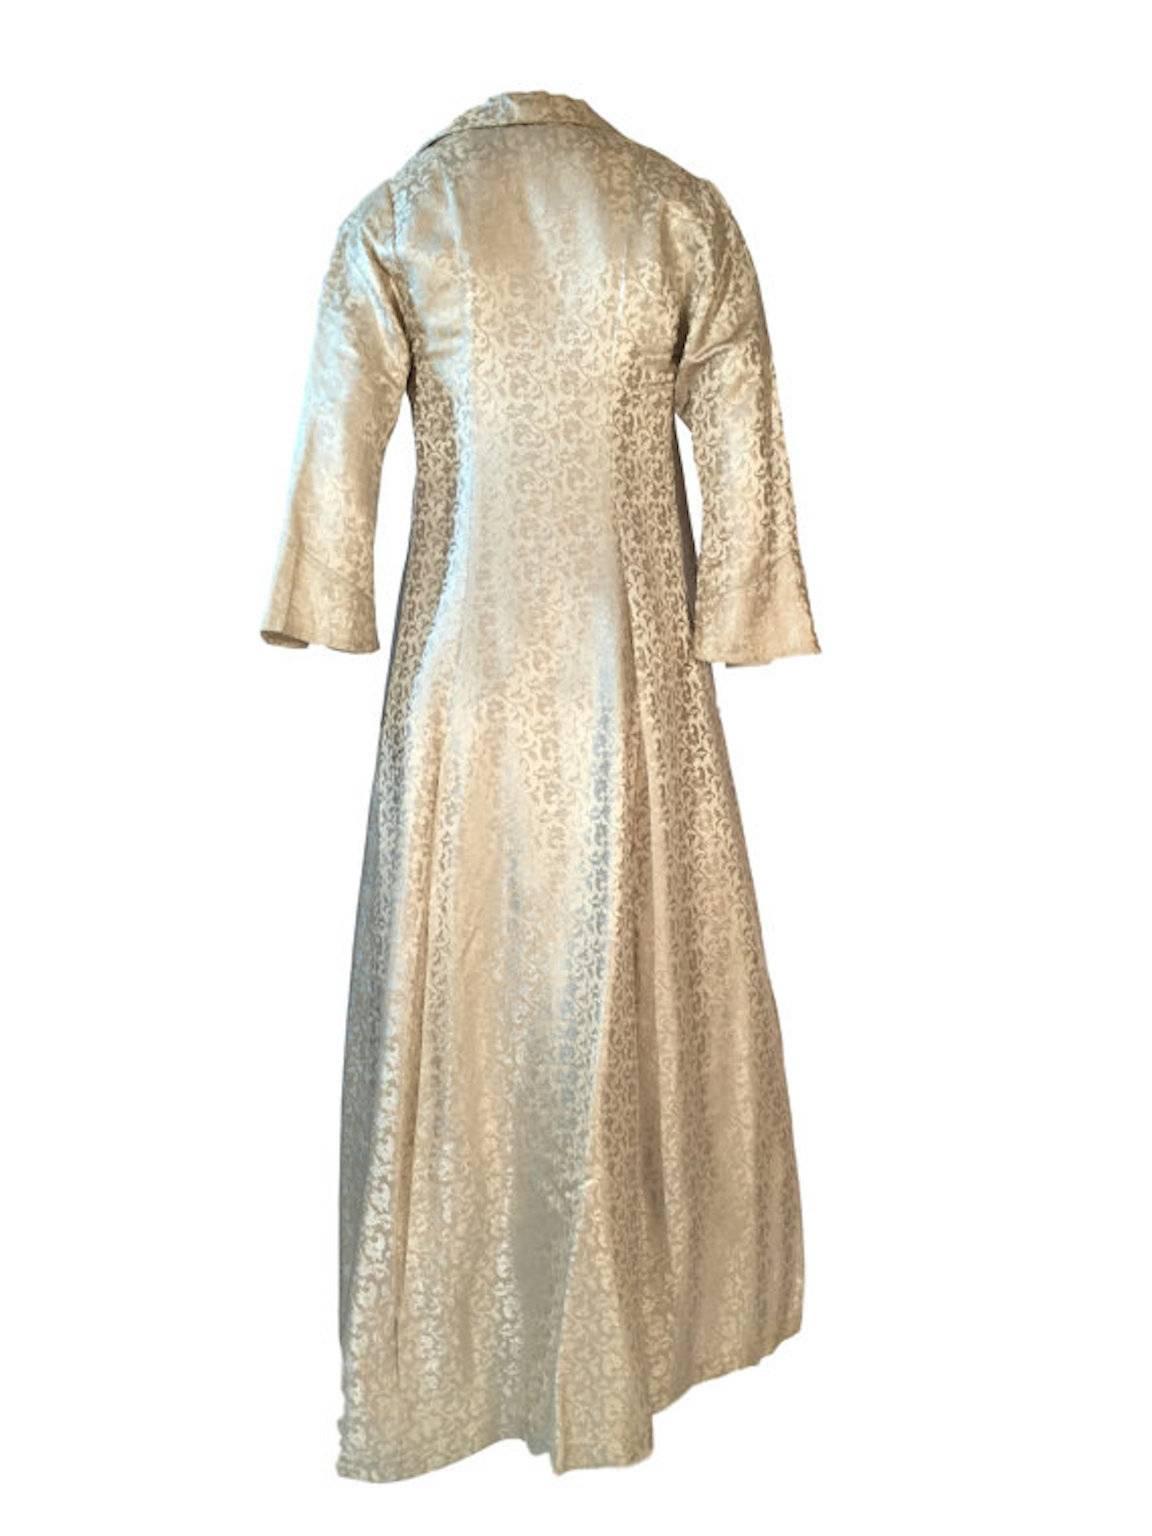 Thea Porter Made In France Cream Satin Damask Evening Coat. Paisley design silk maxi coat, made in the 1970s, has one button front fastening, relaxed fit from waist, fitted slightly flared cropped sleeves.

Size UK 8, measuring 16 inches across bust